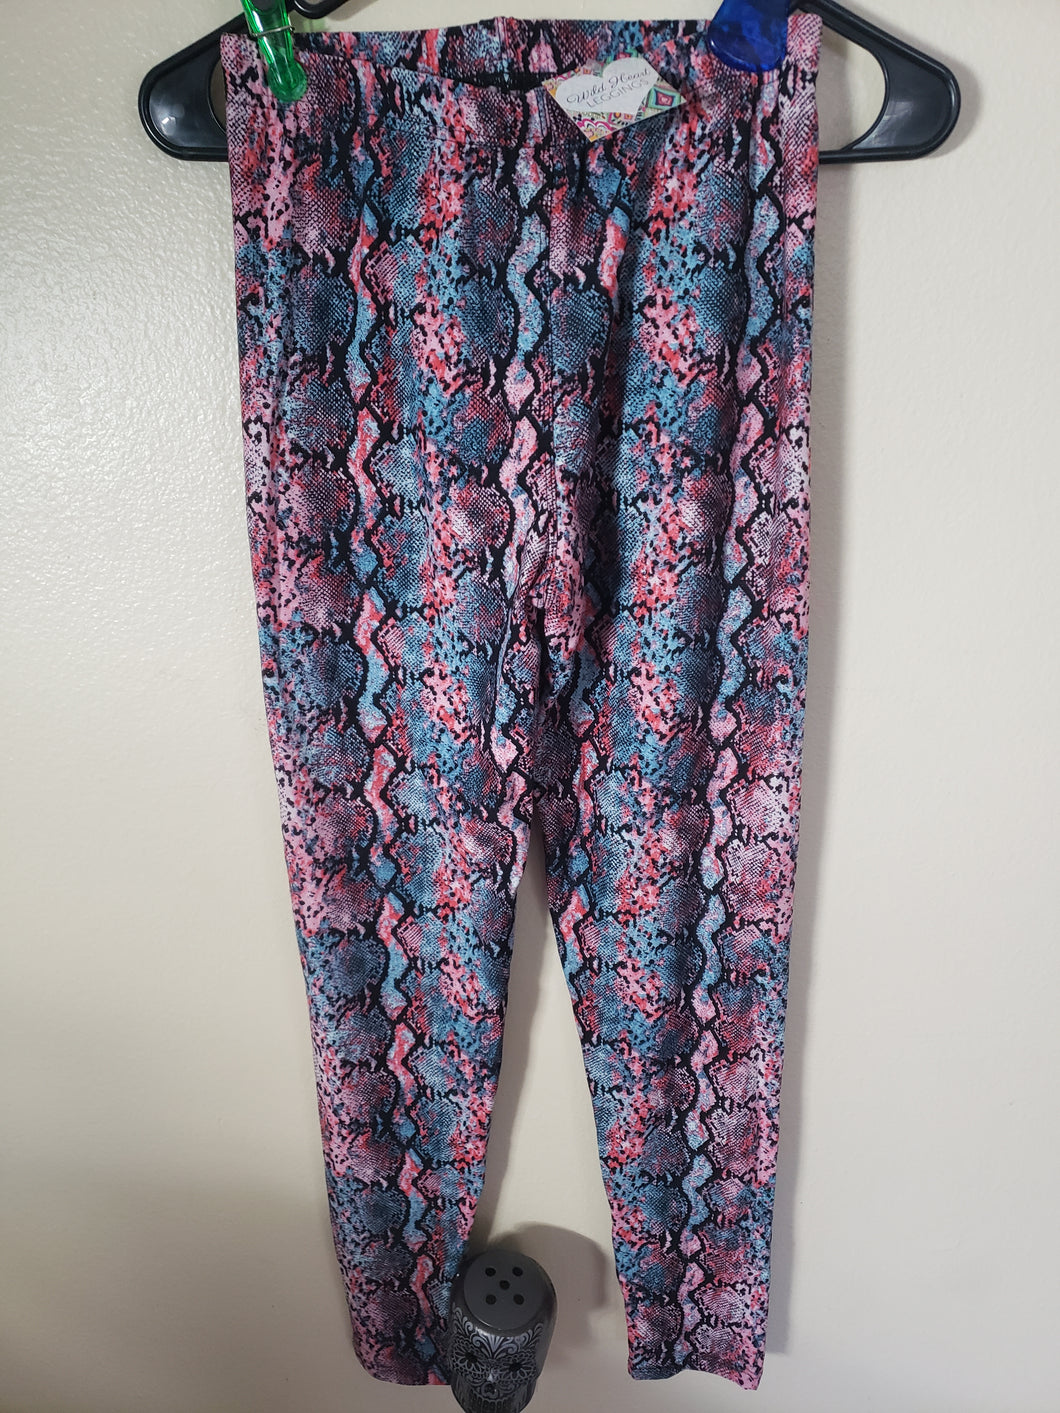 Snakeskin Multi Color Print Luxuriously Soft Leggings for Women (Size-One Size)